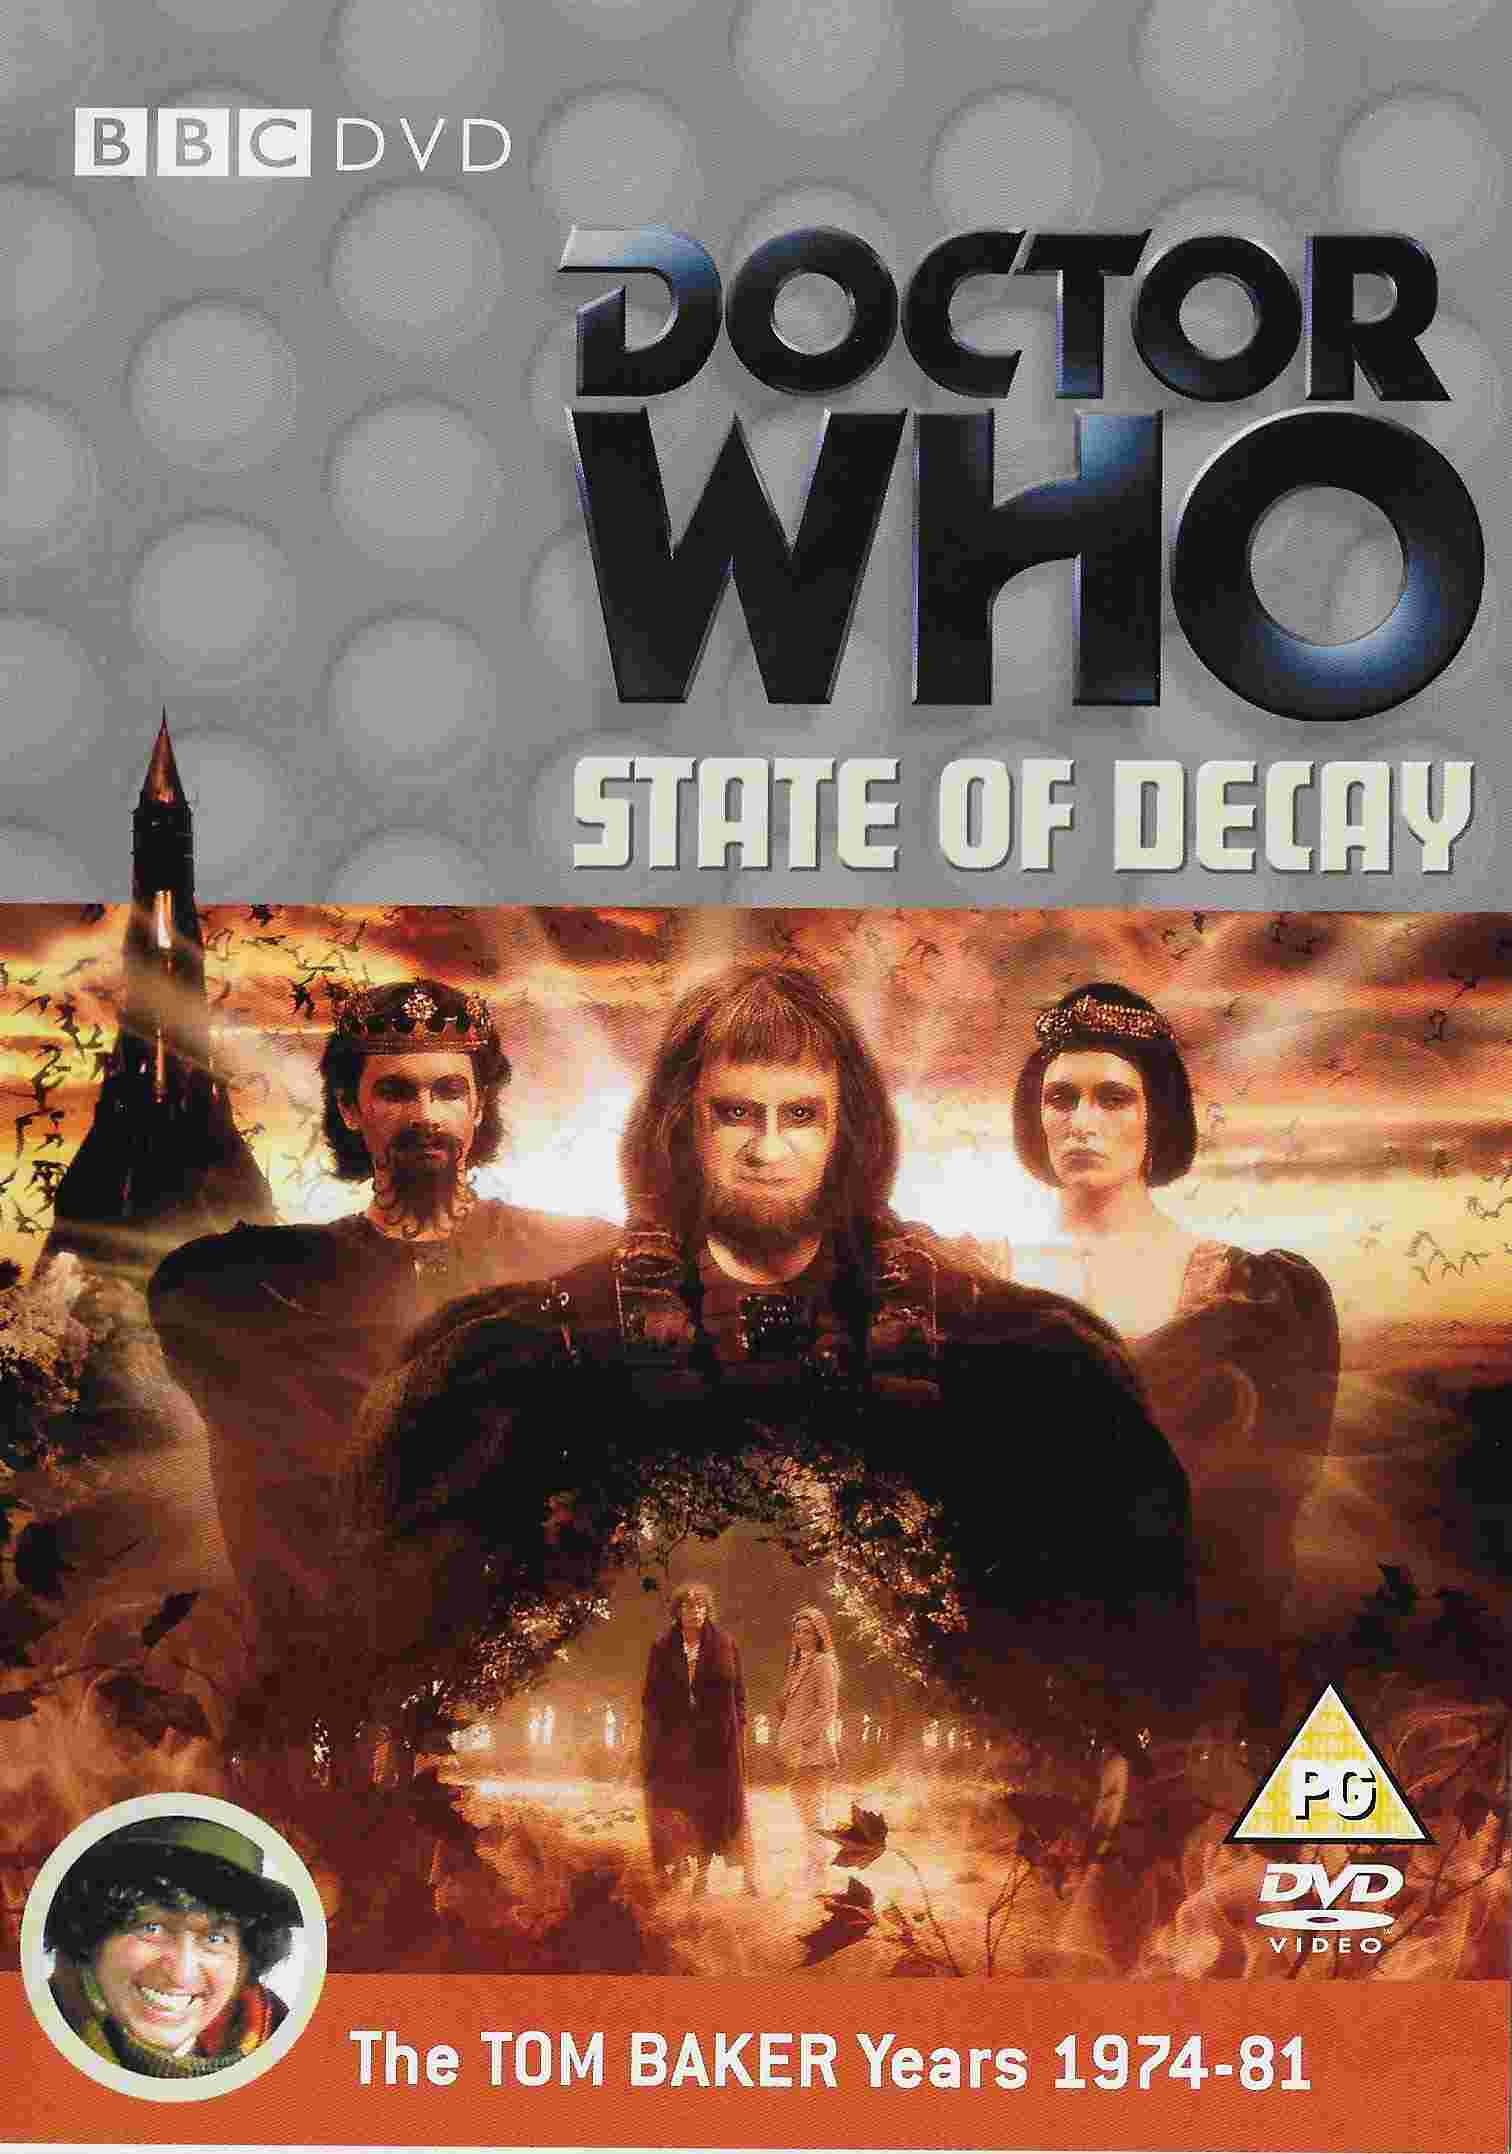 Picture of BBCDVD 1835B Doctor Who - State of decay by artist Terrance Dicks from the BBC dvds - Records and Tapes library